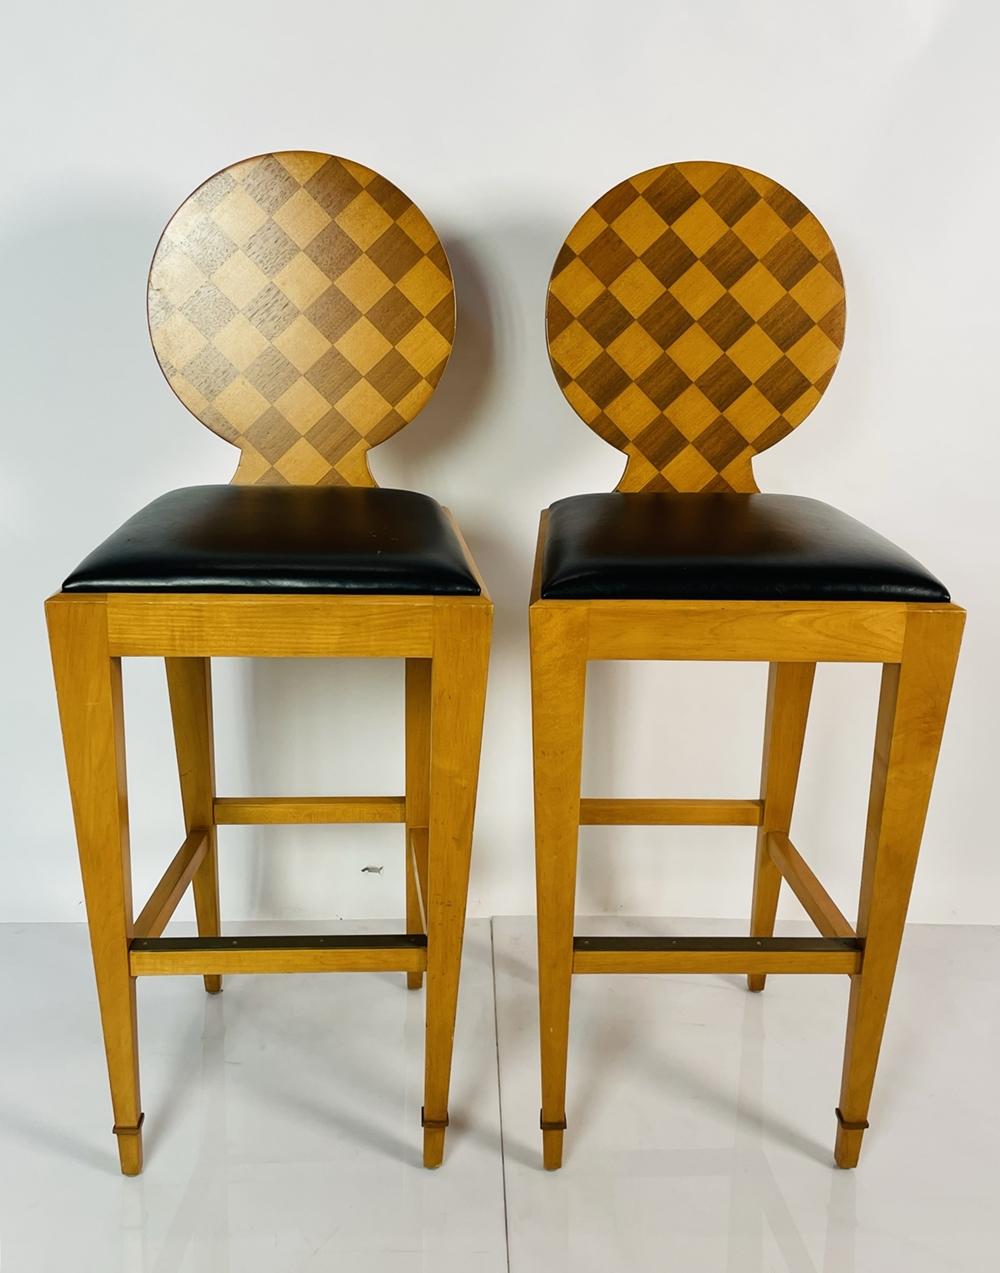 American Pair of Paris Hall Harlequin Bar Stools by John Hutton for Donghia